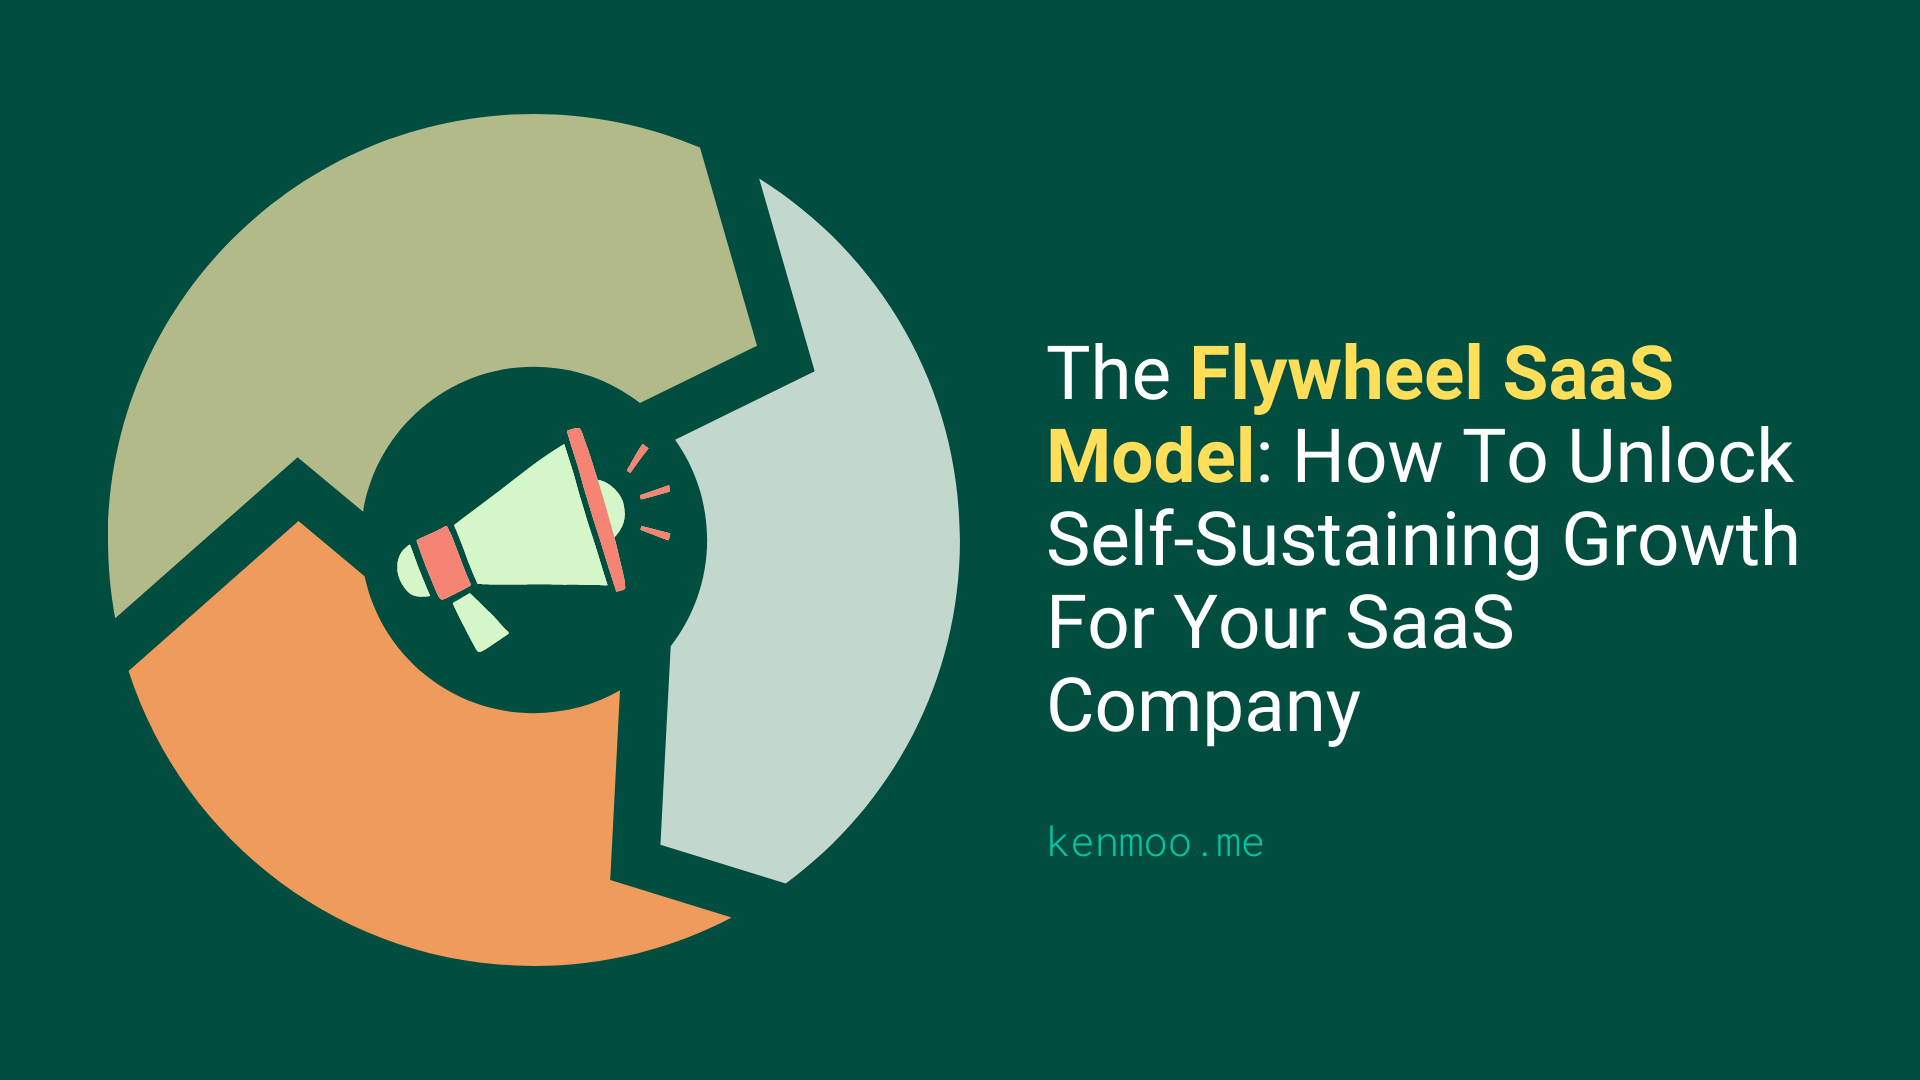 The Flywheel SaaS Model: How To Unlock Self-Sustaining Growth For Your SaaS Company